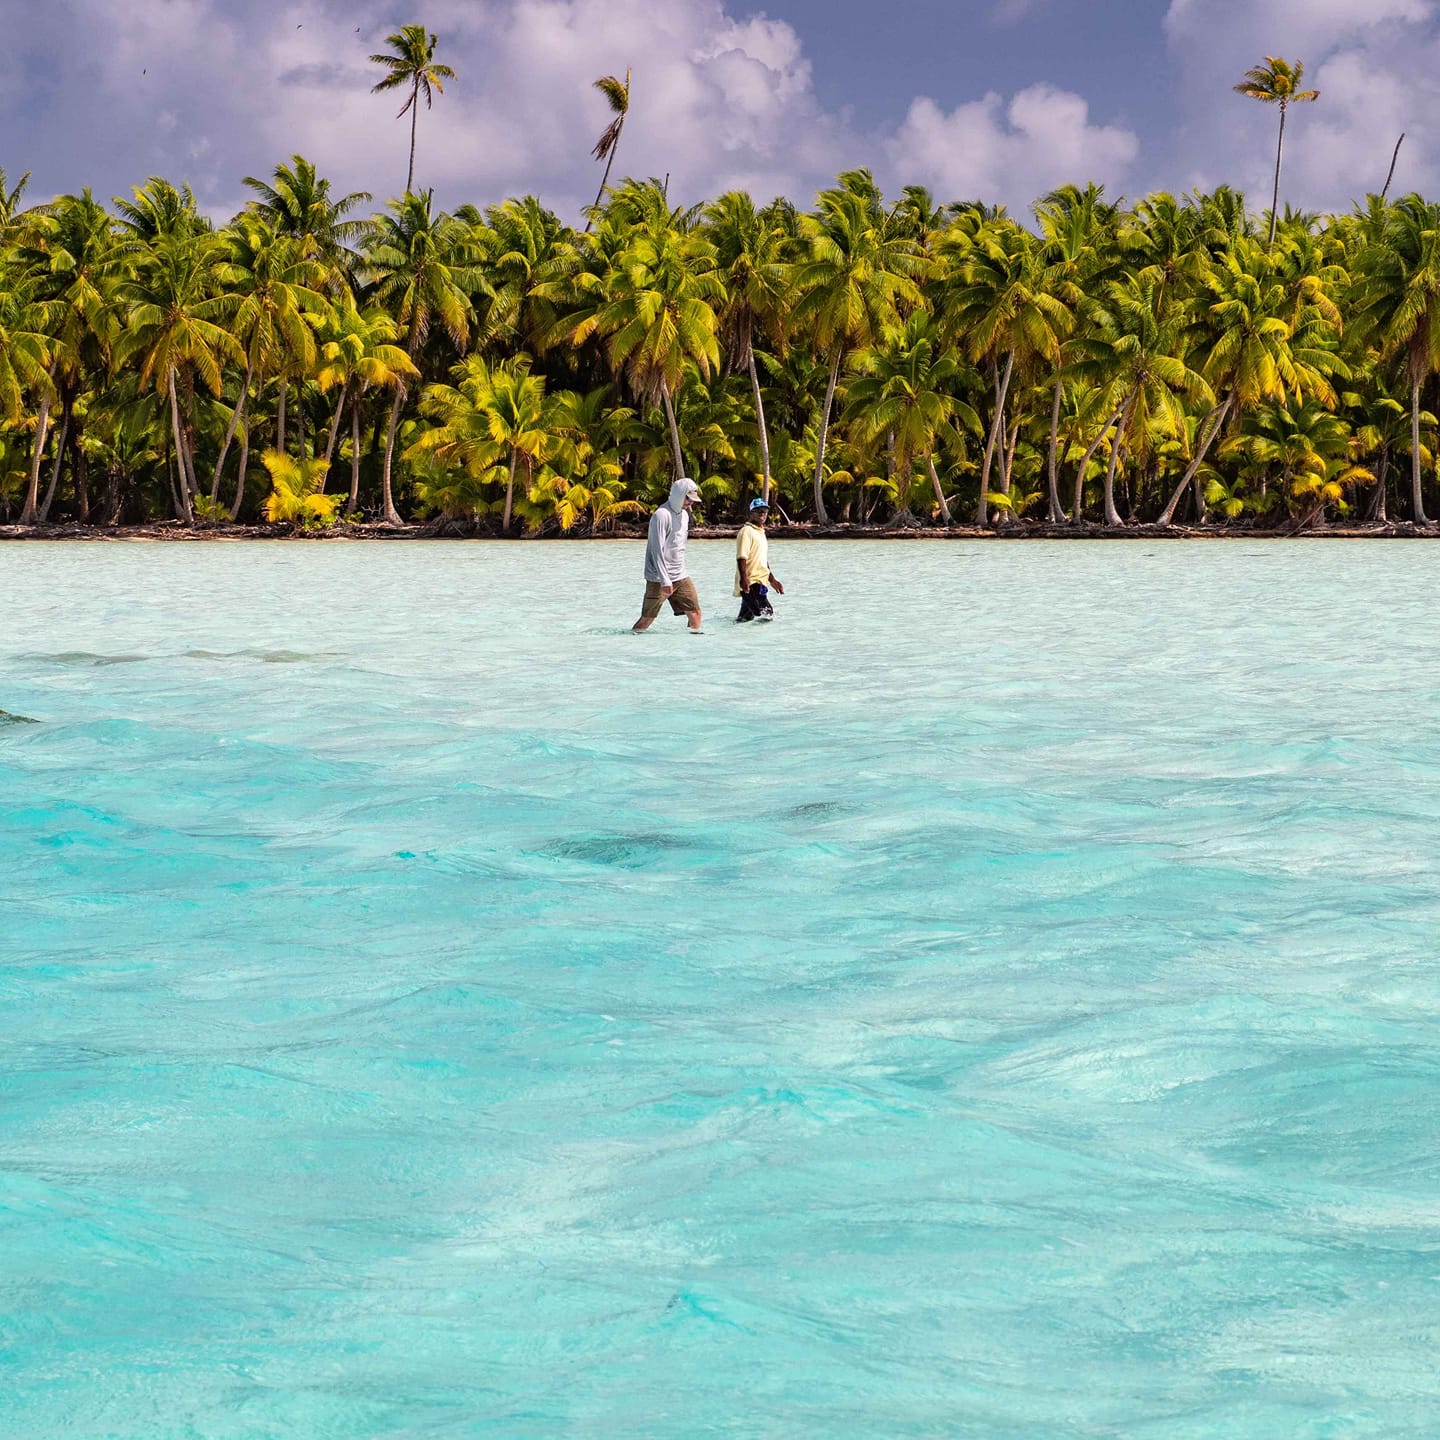 Two men walking in knee-deep aquamarine waters of Fanning Island, with lush coconut trees in the beach